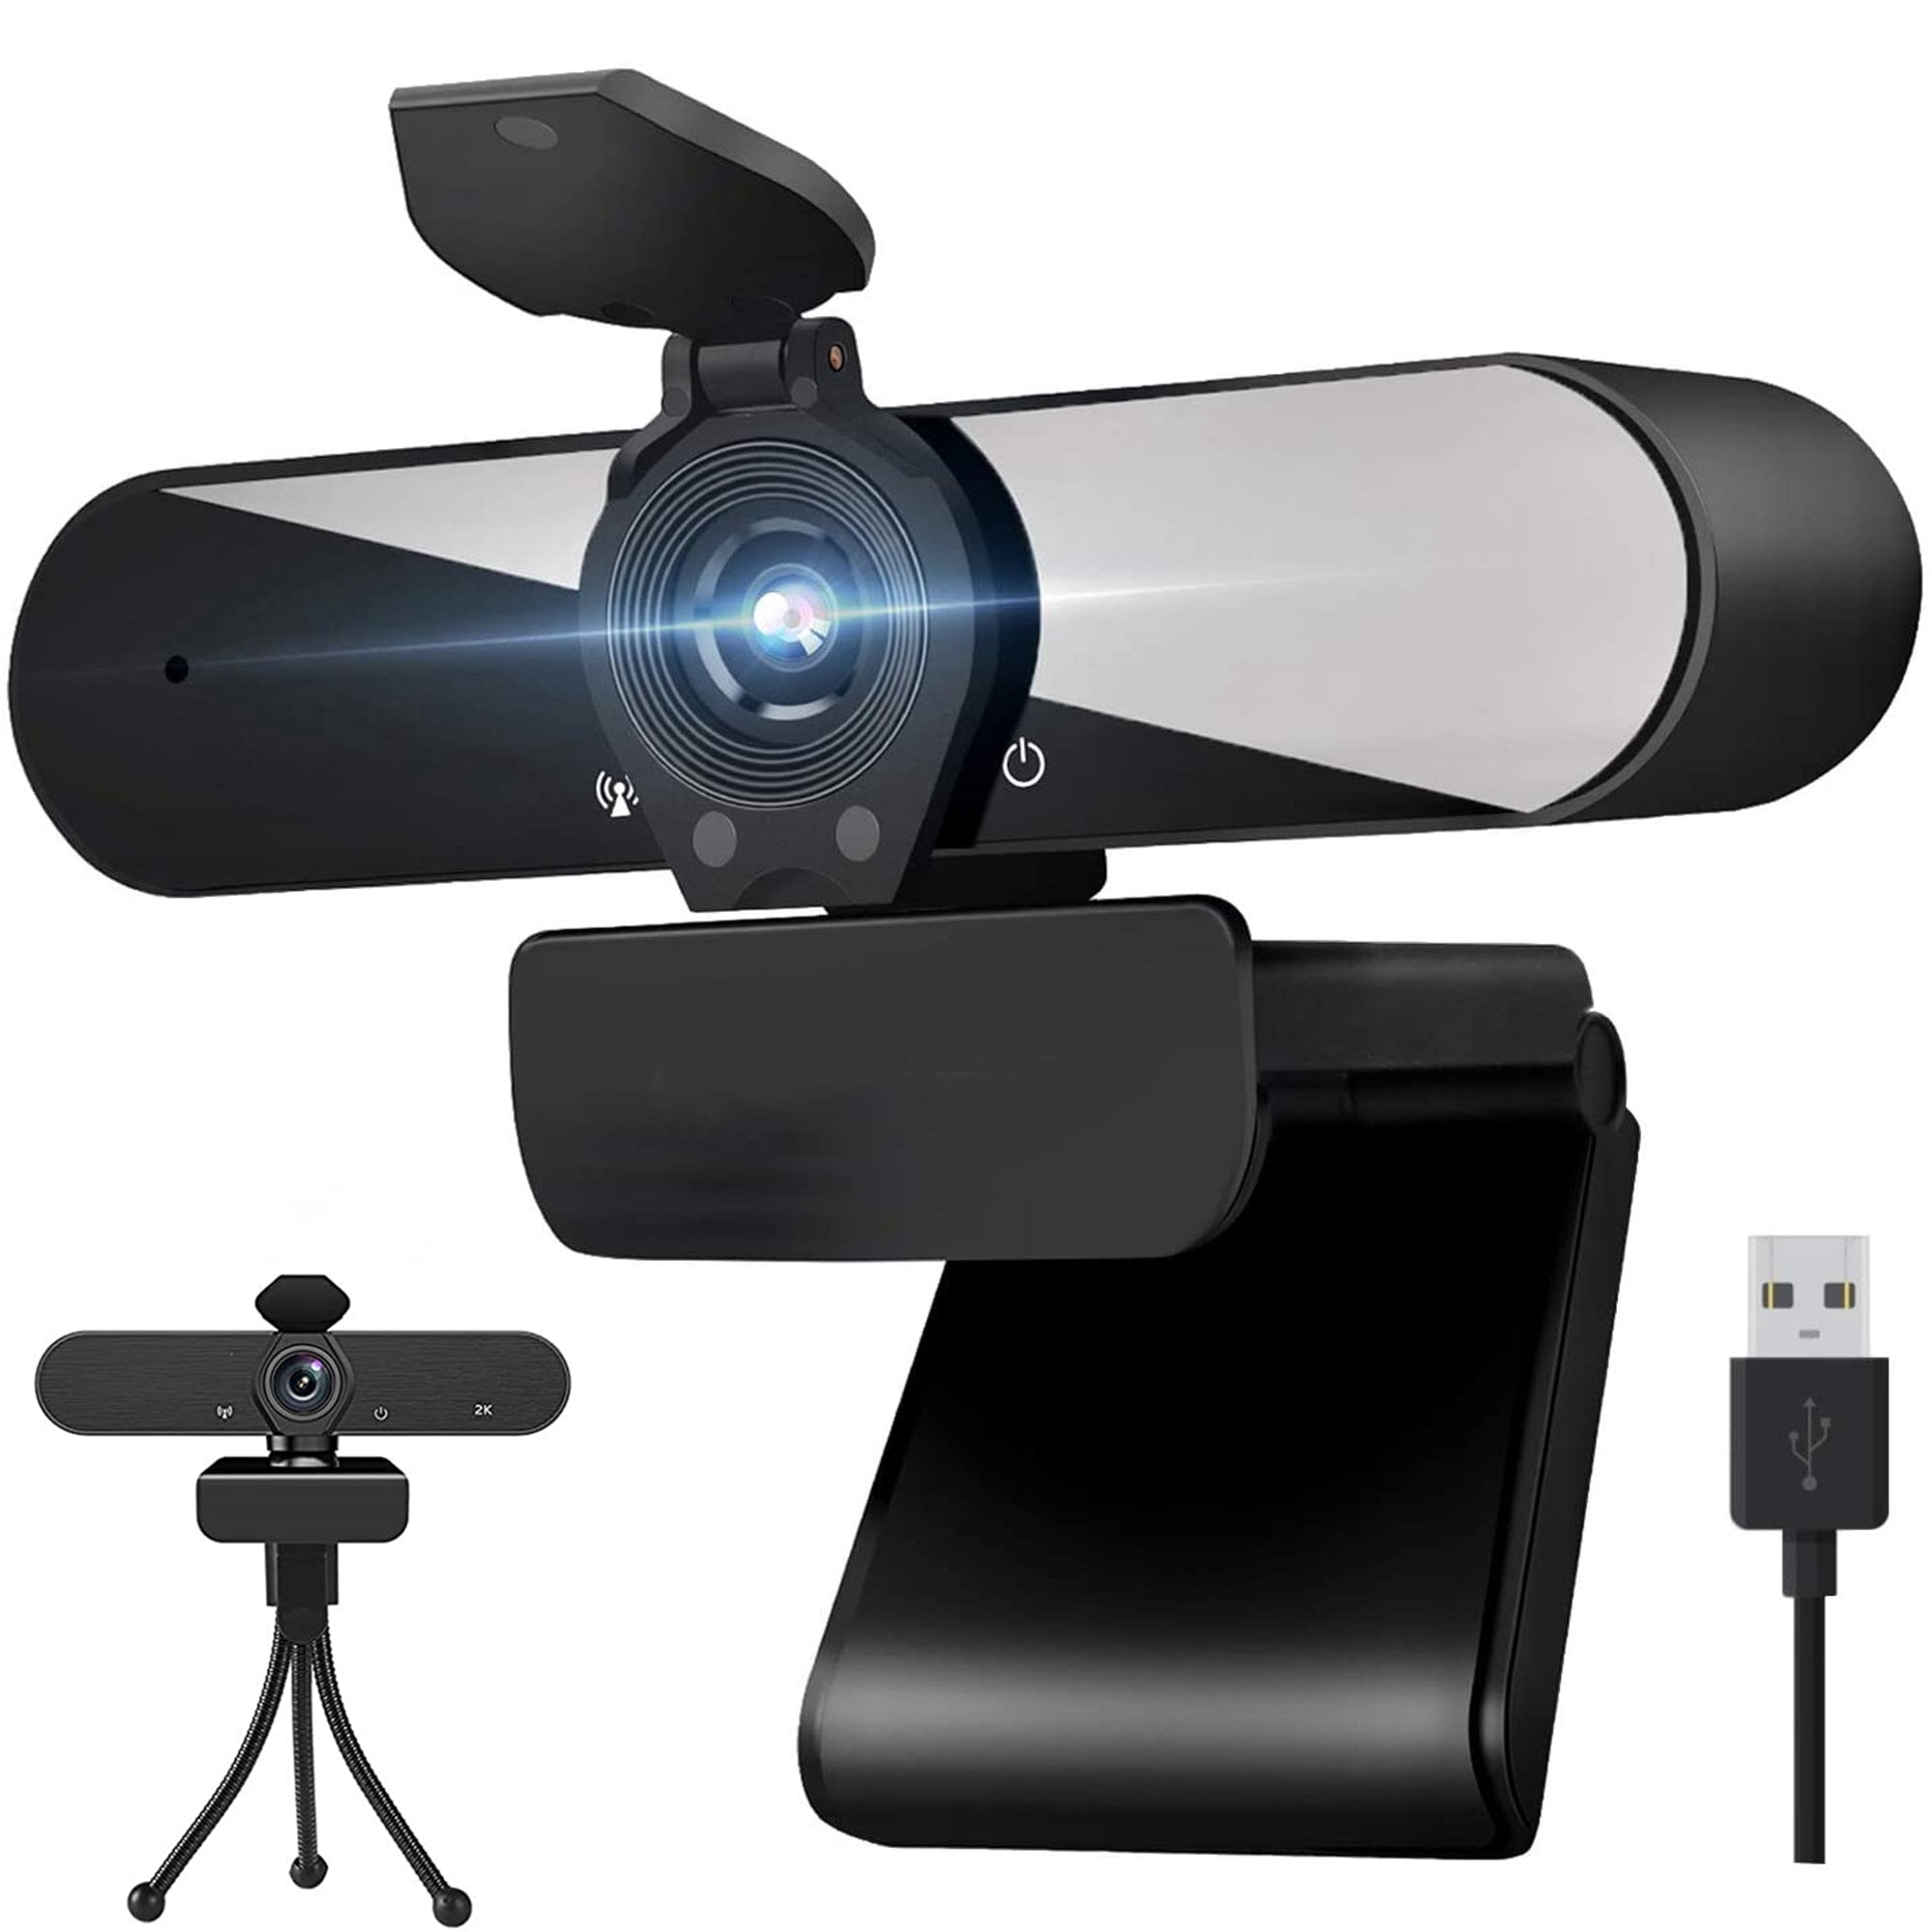  USB Webcam with Microphone,HD PC Camera Web Camera 360-Degree  Swivel Clip on Web Cam, Auto Color Correction & Auto Focus for Online  Chatting Video Recording Broadcasting : Electronics